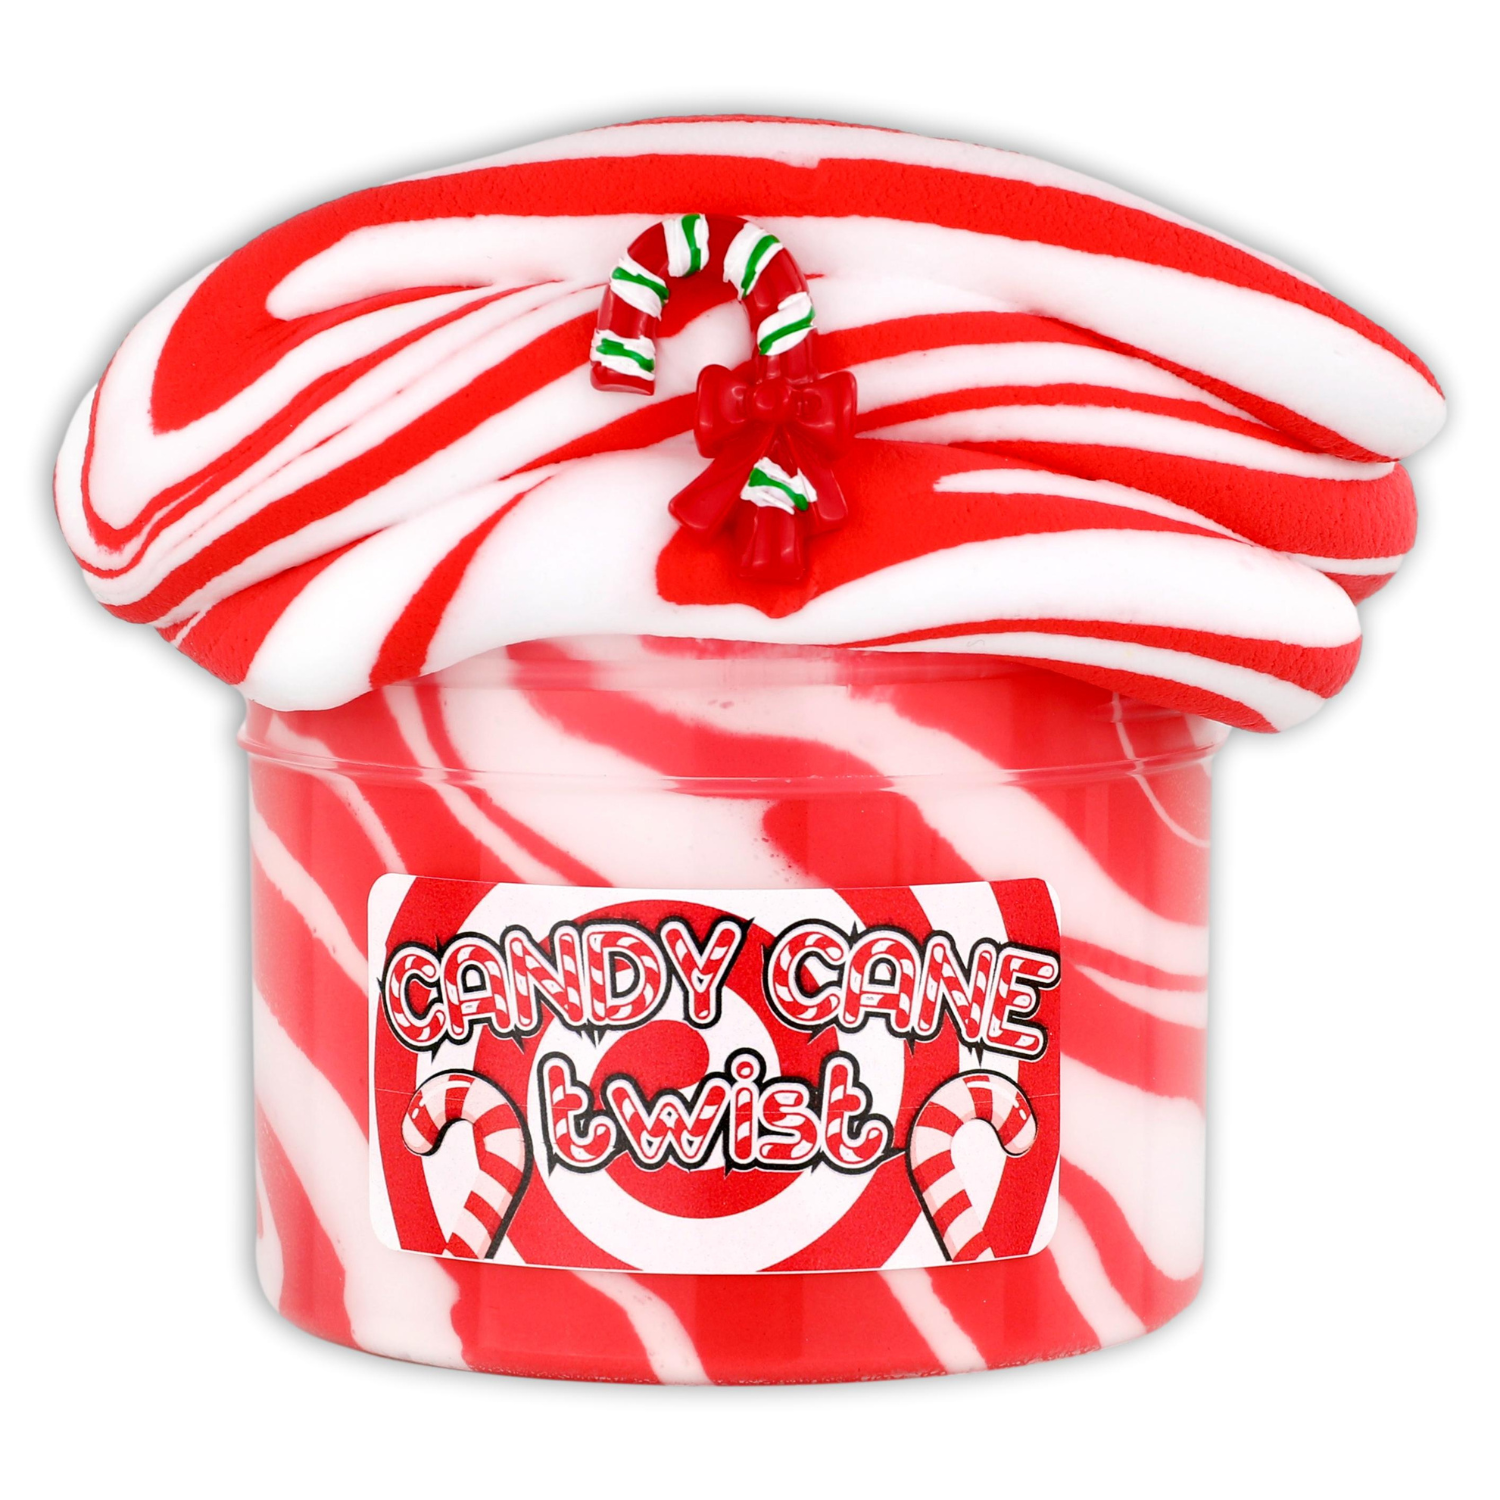 PREORDER: Candy Cane Twist - Wholesale Case of 18 - September 1st Release Date